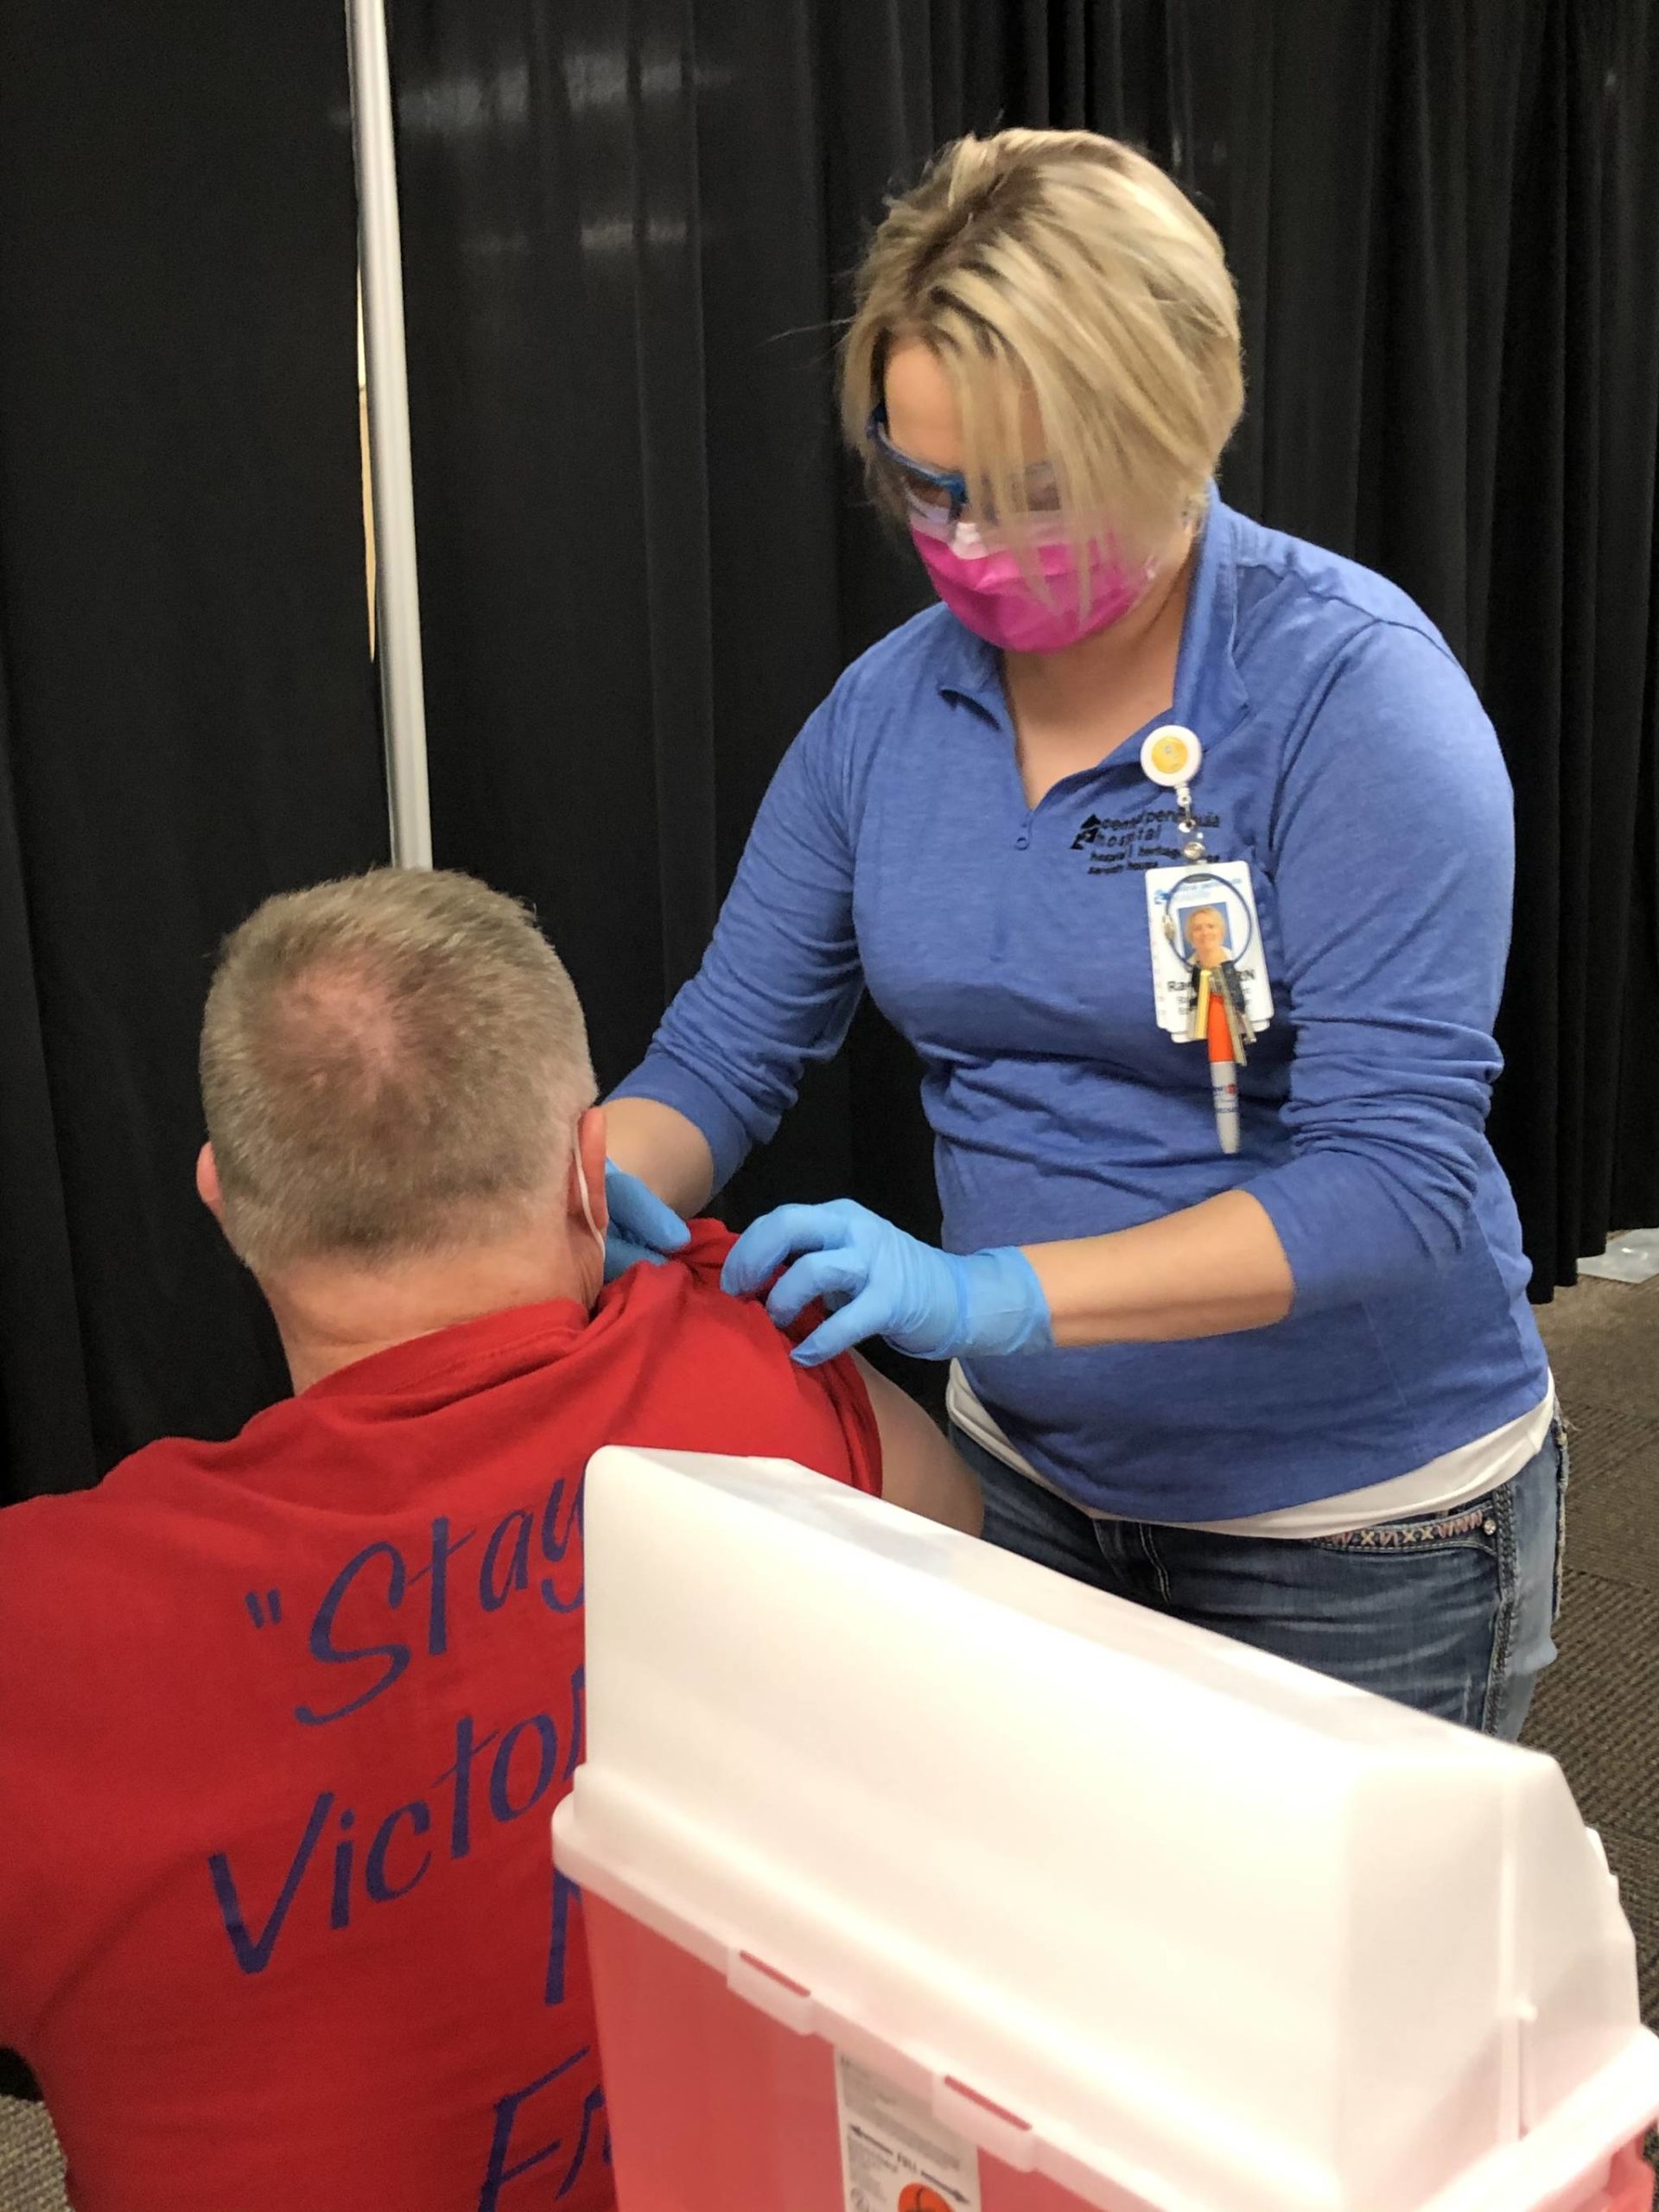 RN Rachel Verba (right) administers a dose of Pfizer’s COVID-19 vaccine to Dr. Chris Michelson (left) on Friday, Dec. 18, 2020 in Soldotna, Alaska. (Photo courtesy Bruce Richards/CPH)